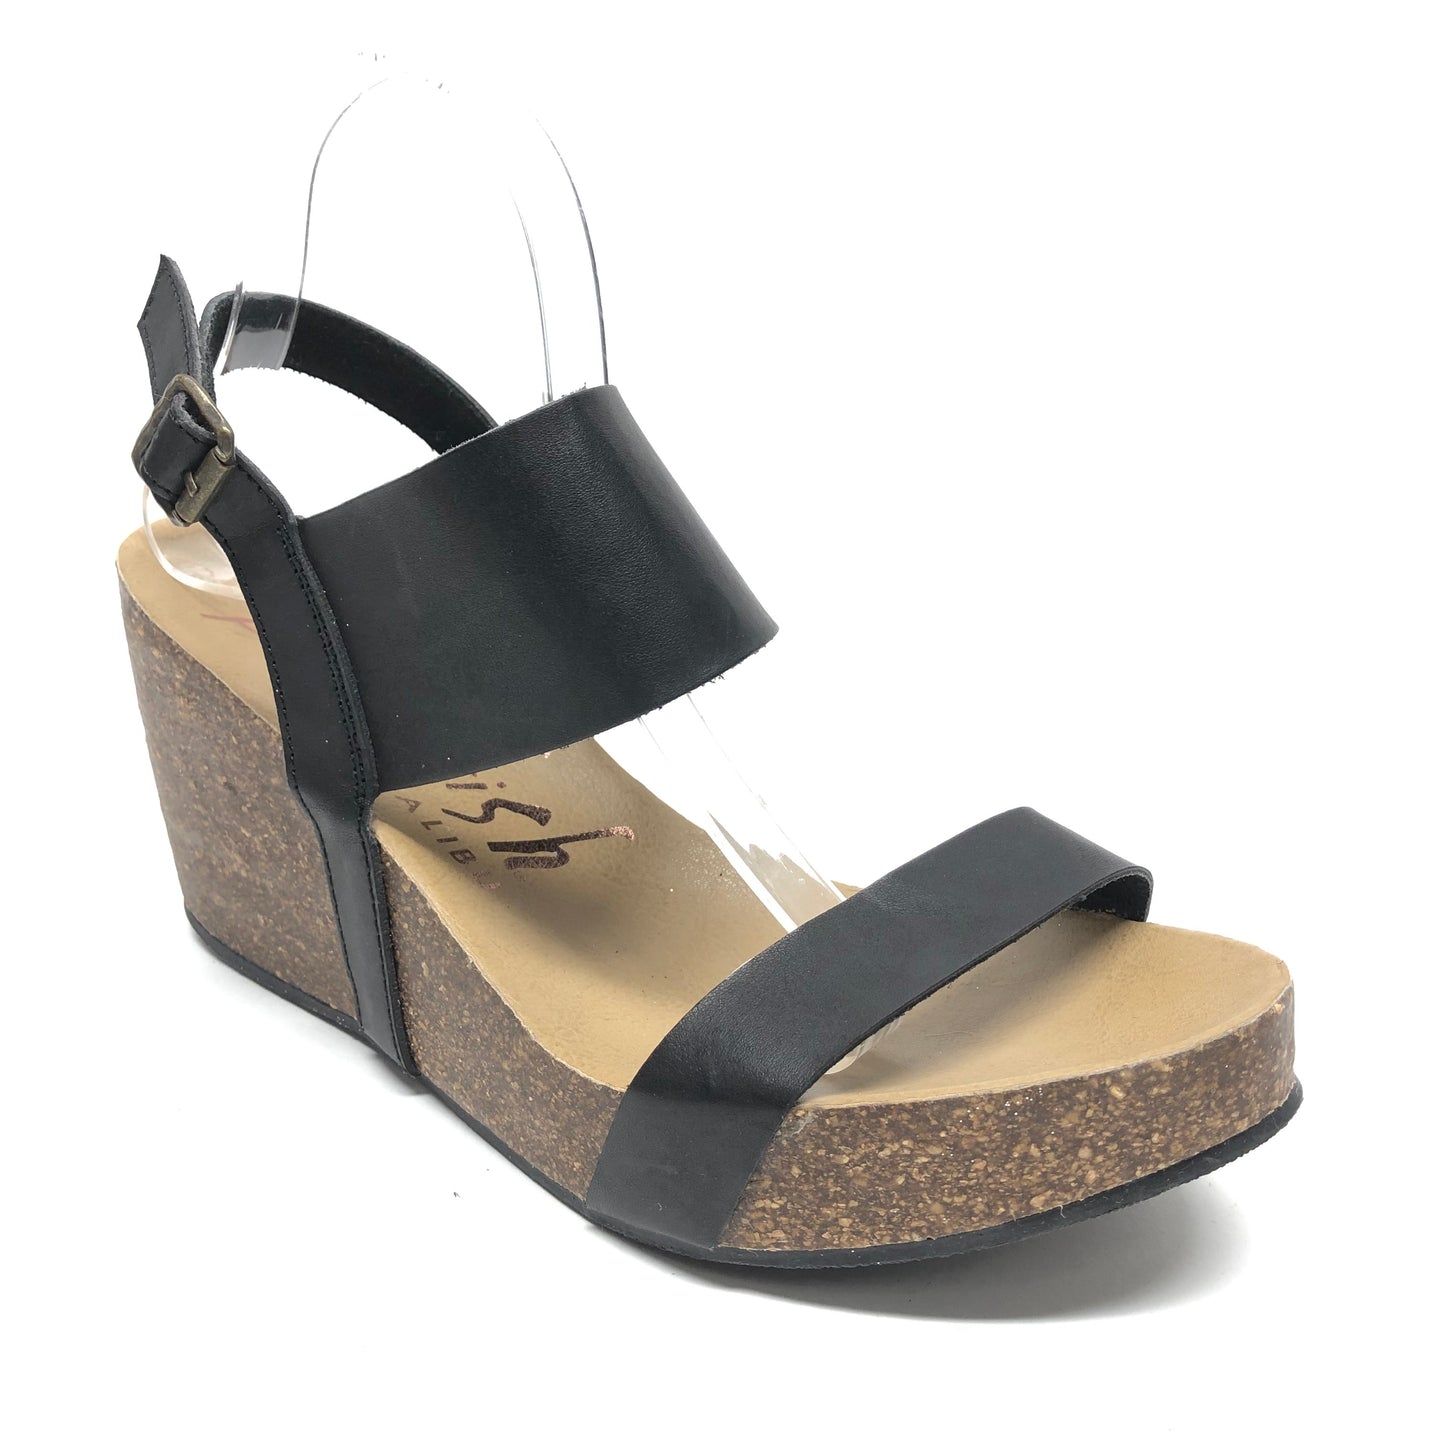 Sandals Heels Wedge By Blowfish  Size: 11